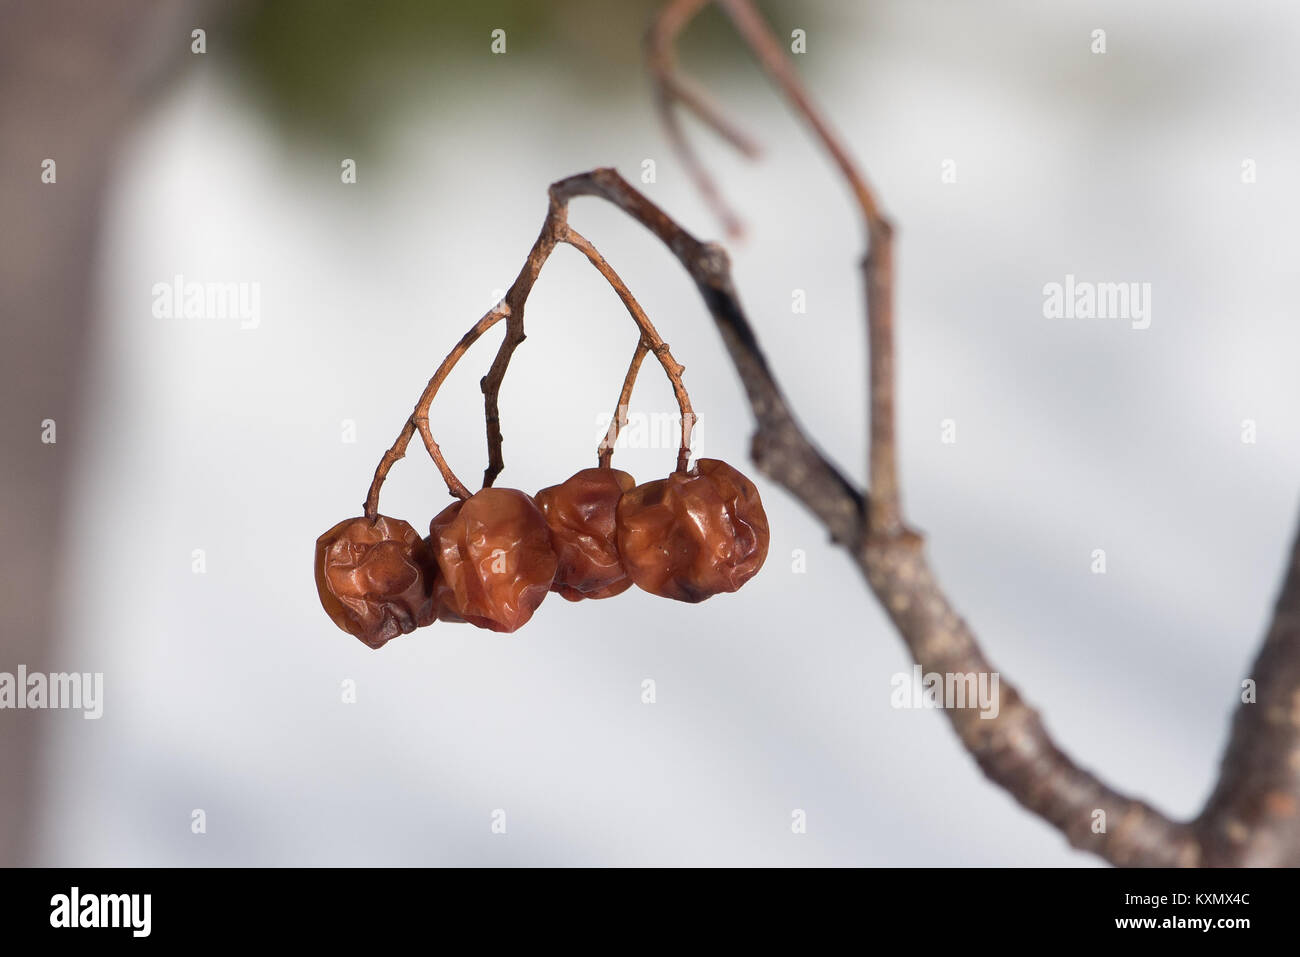 Wrinkled berries on a Mountain Ash tree, Sorbus americana, in the Adirondack Mountains, NY USA Stock Photo